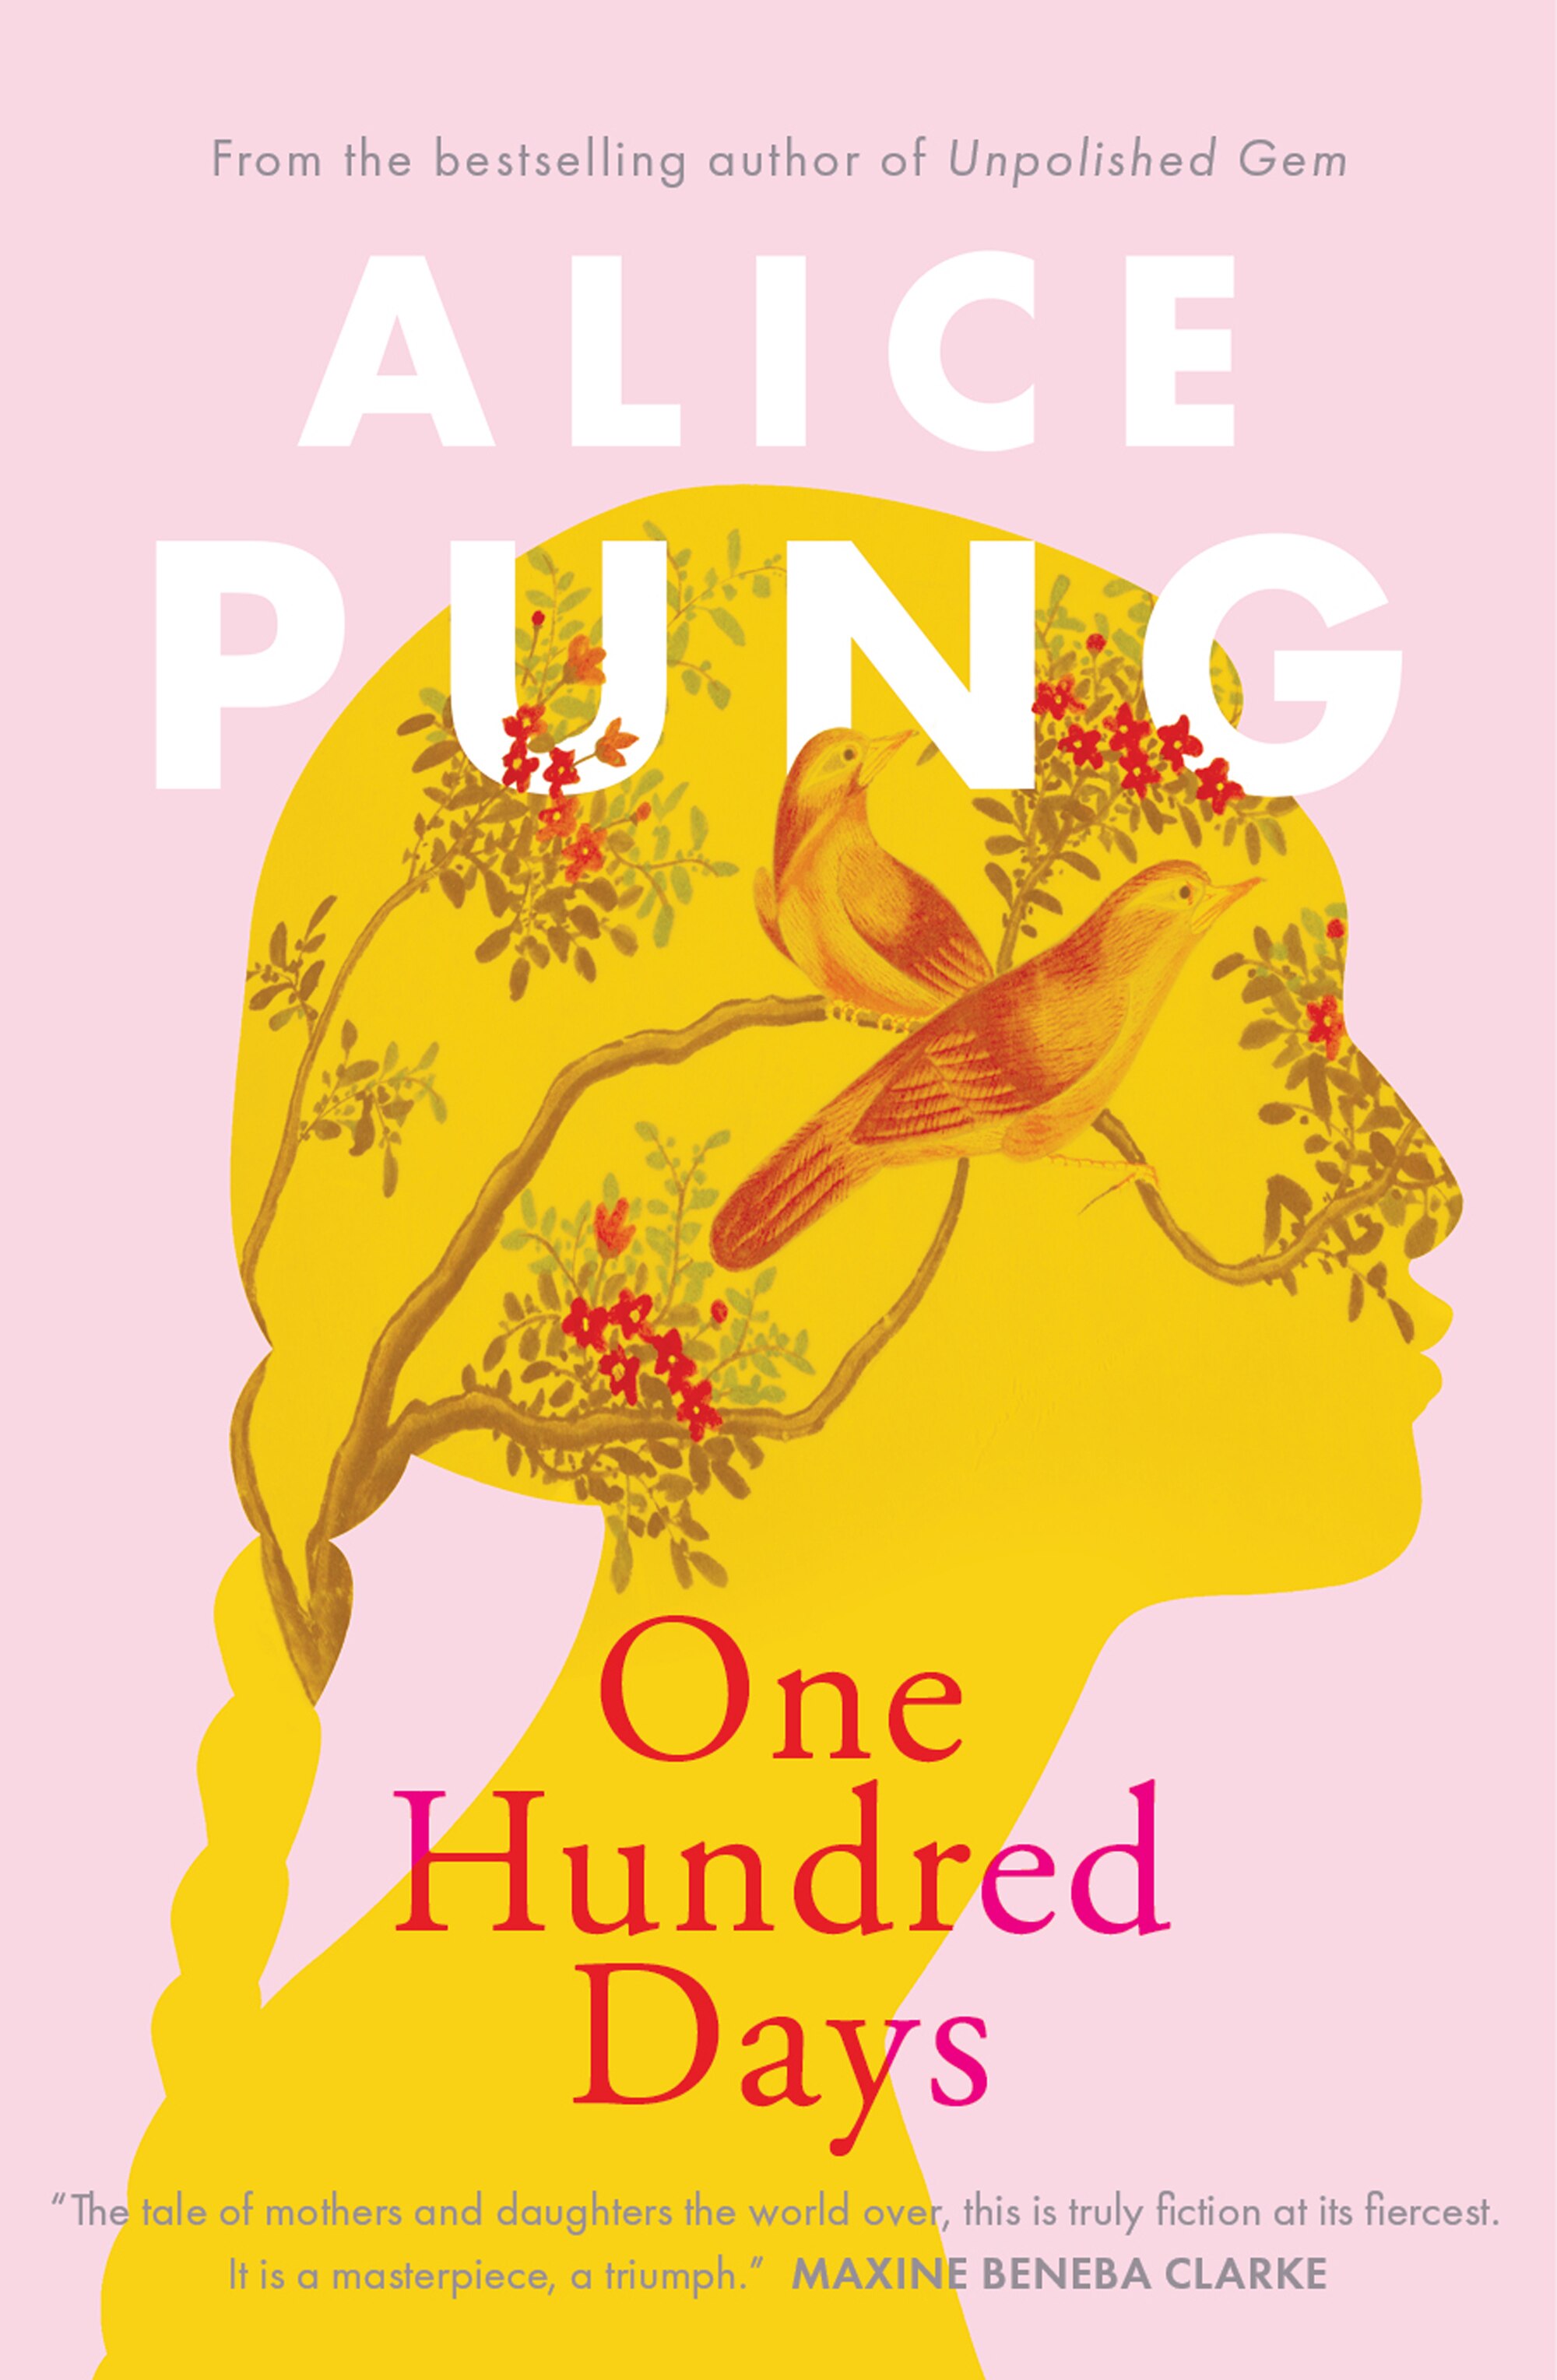 Cover of One Hundred Days by Alice Pung featuring the silhouette of a woman filled out with images of branches and birds.